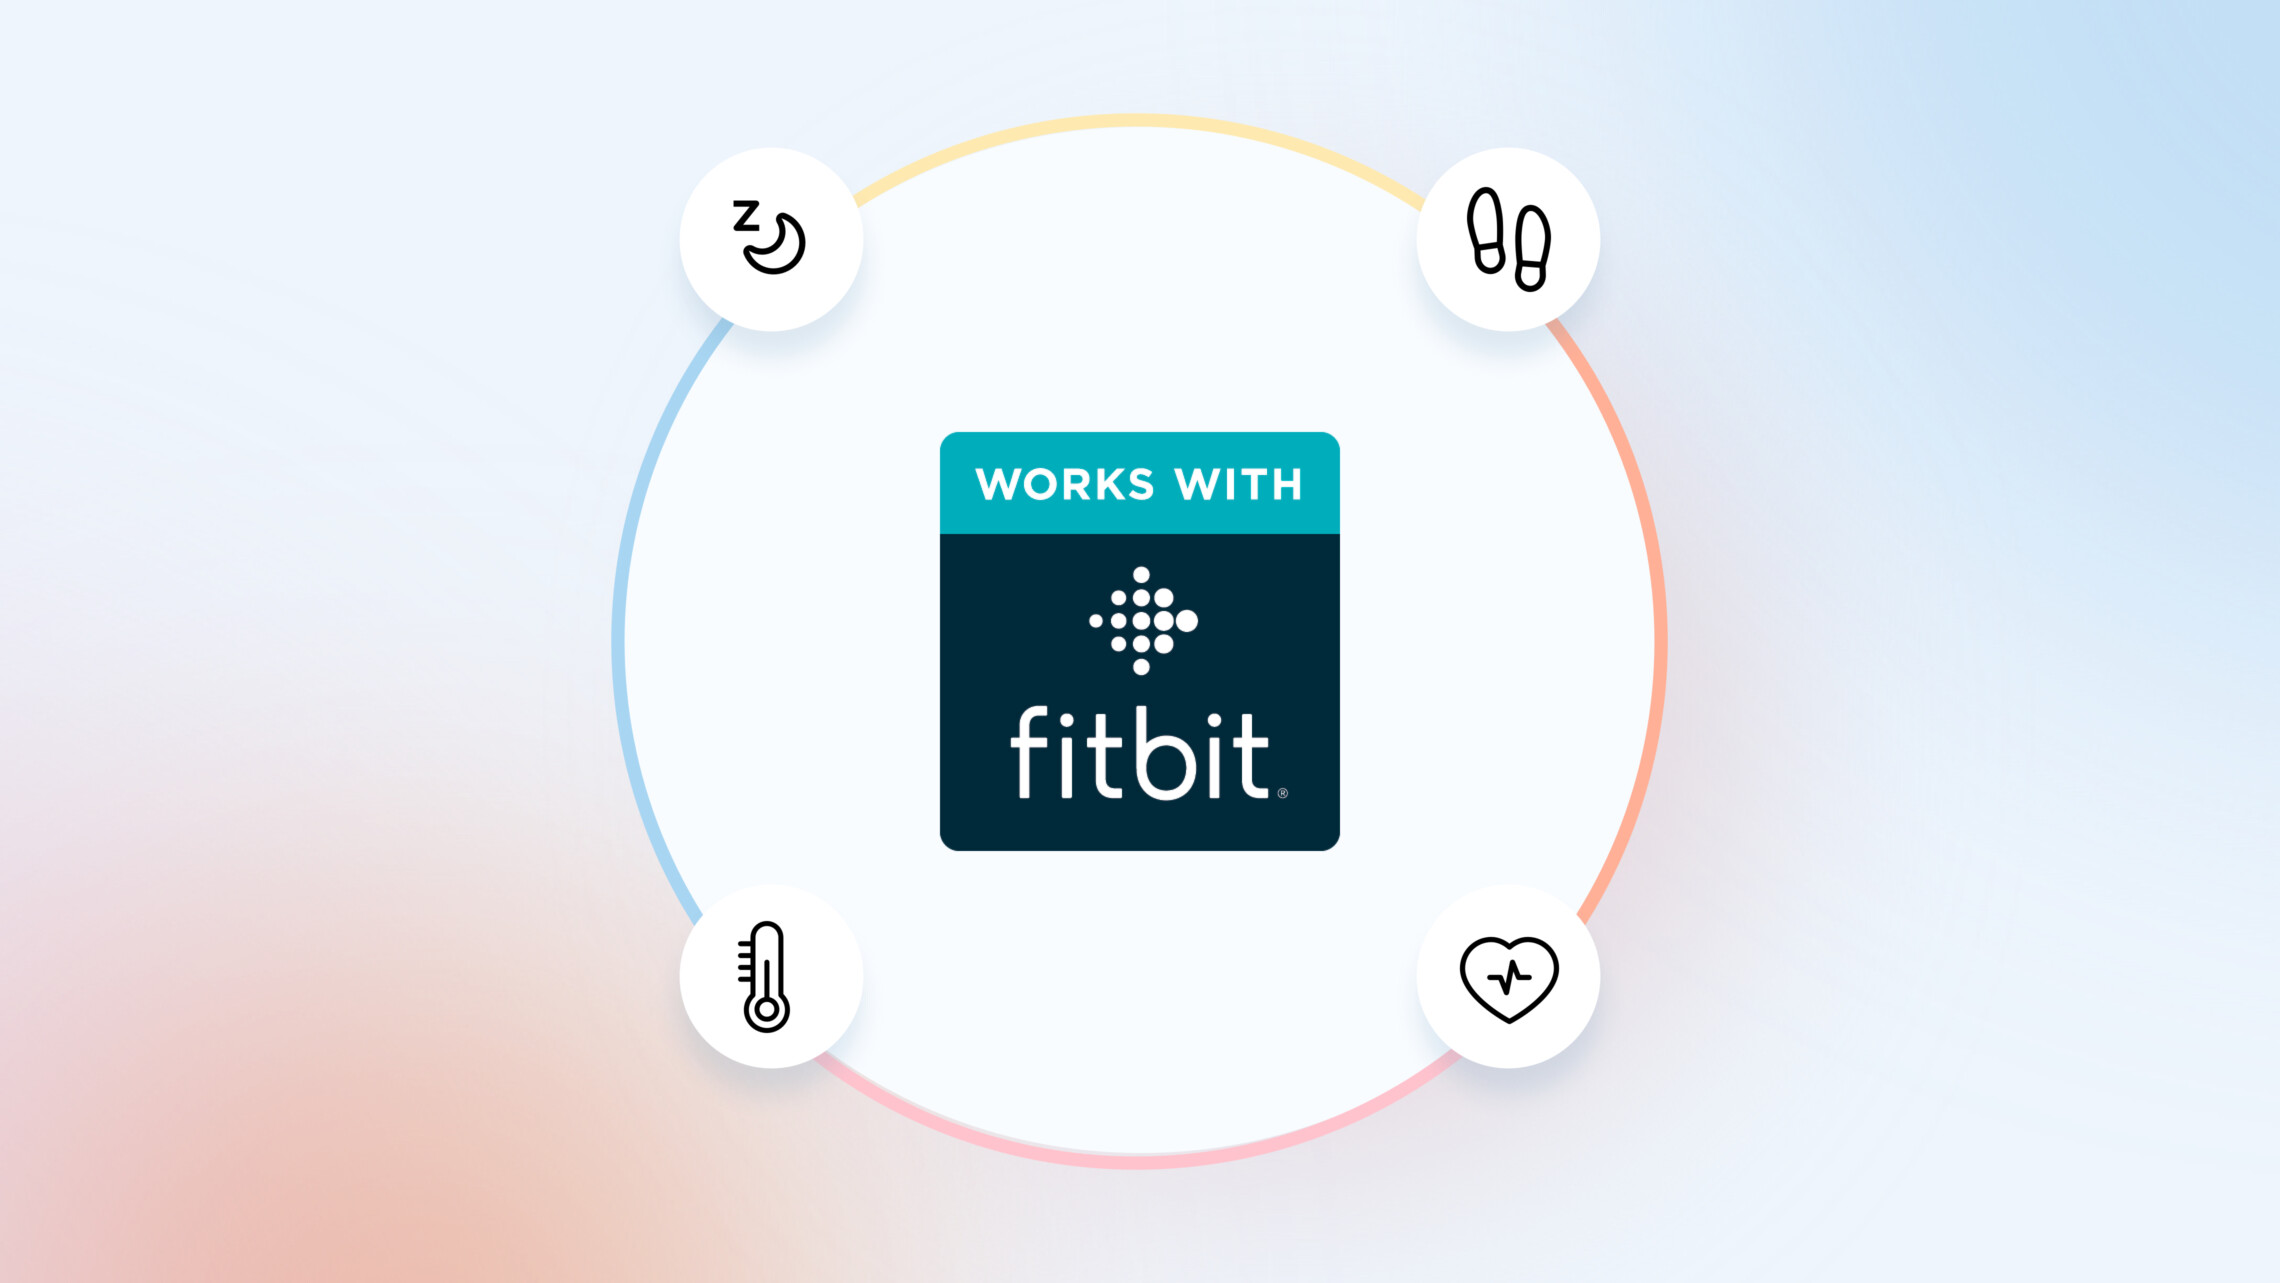 Works with subtext with Fitbit logo within circle with decorative clip art